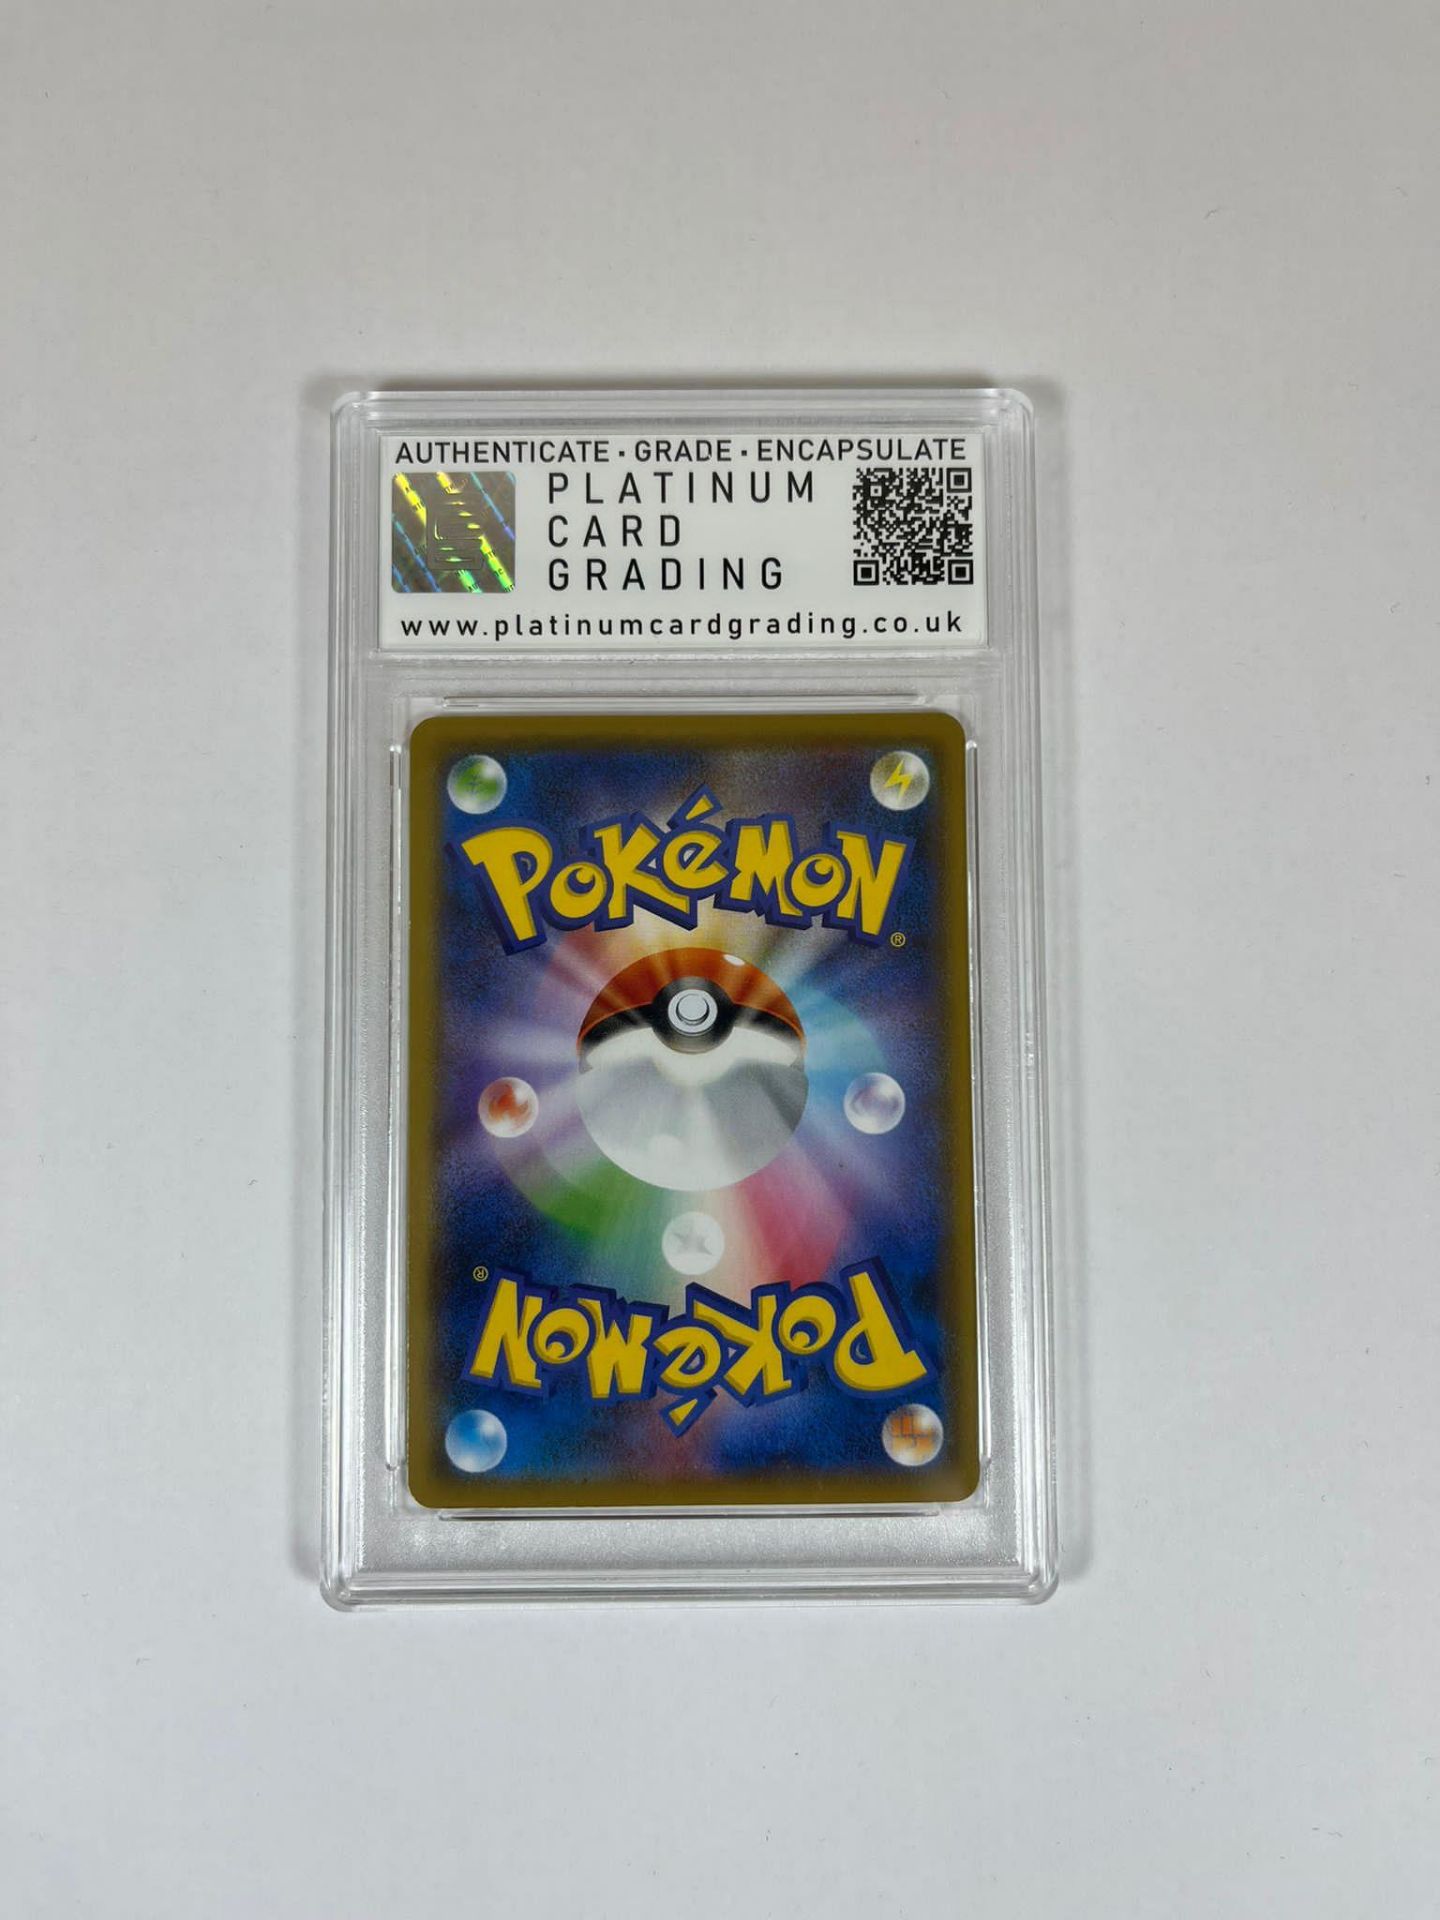 A GRADED POKEMON CARD - 2019 JAPANESE MEWTWO DECECTIVE PIKACHU HOLO - GRADE 8 - Image 2 of 2